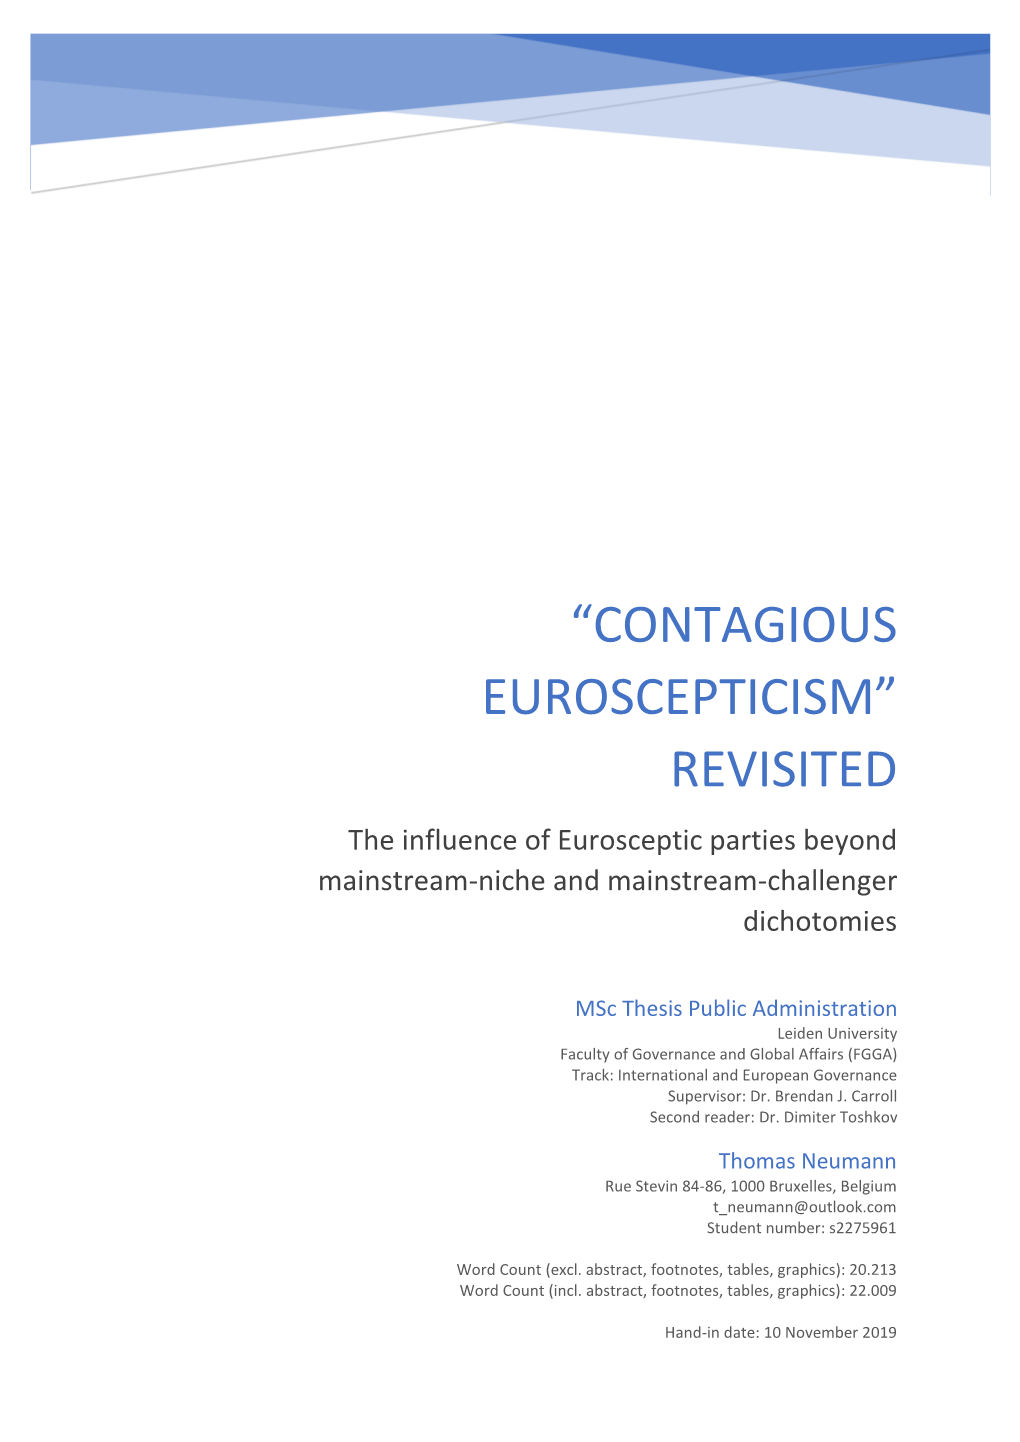 “CONTAGIOUS EUROSCEPTICISM” REVISITED the Influence of Eurosceptic Parties Beyond Mainstream-Niche and Mainstream-Challenger Dichotomies